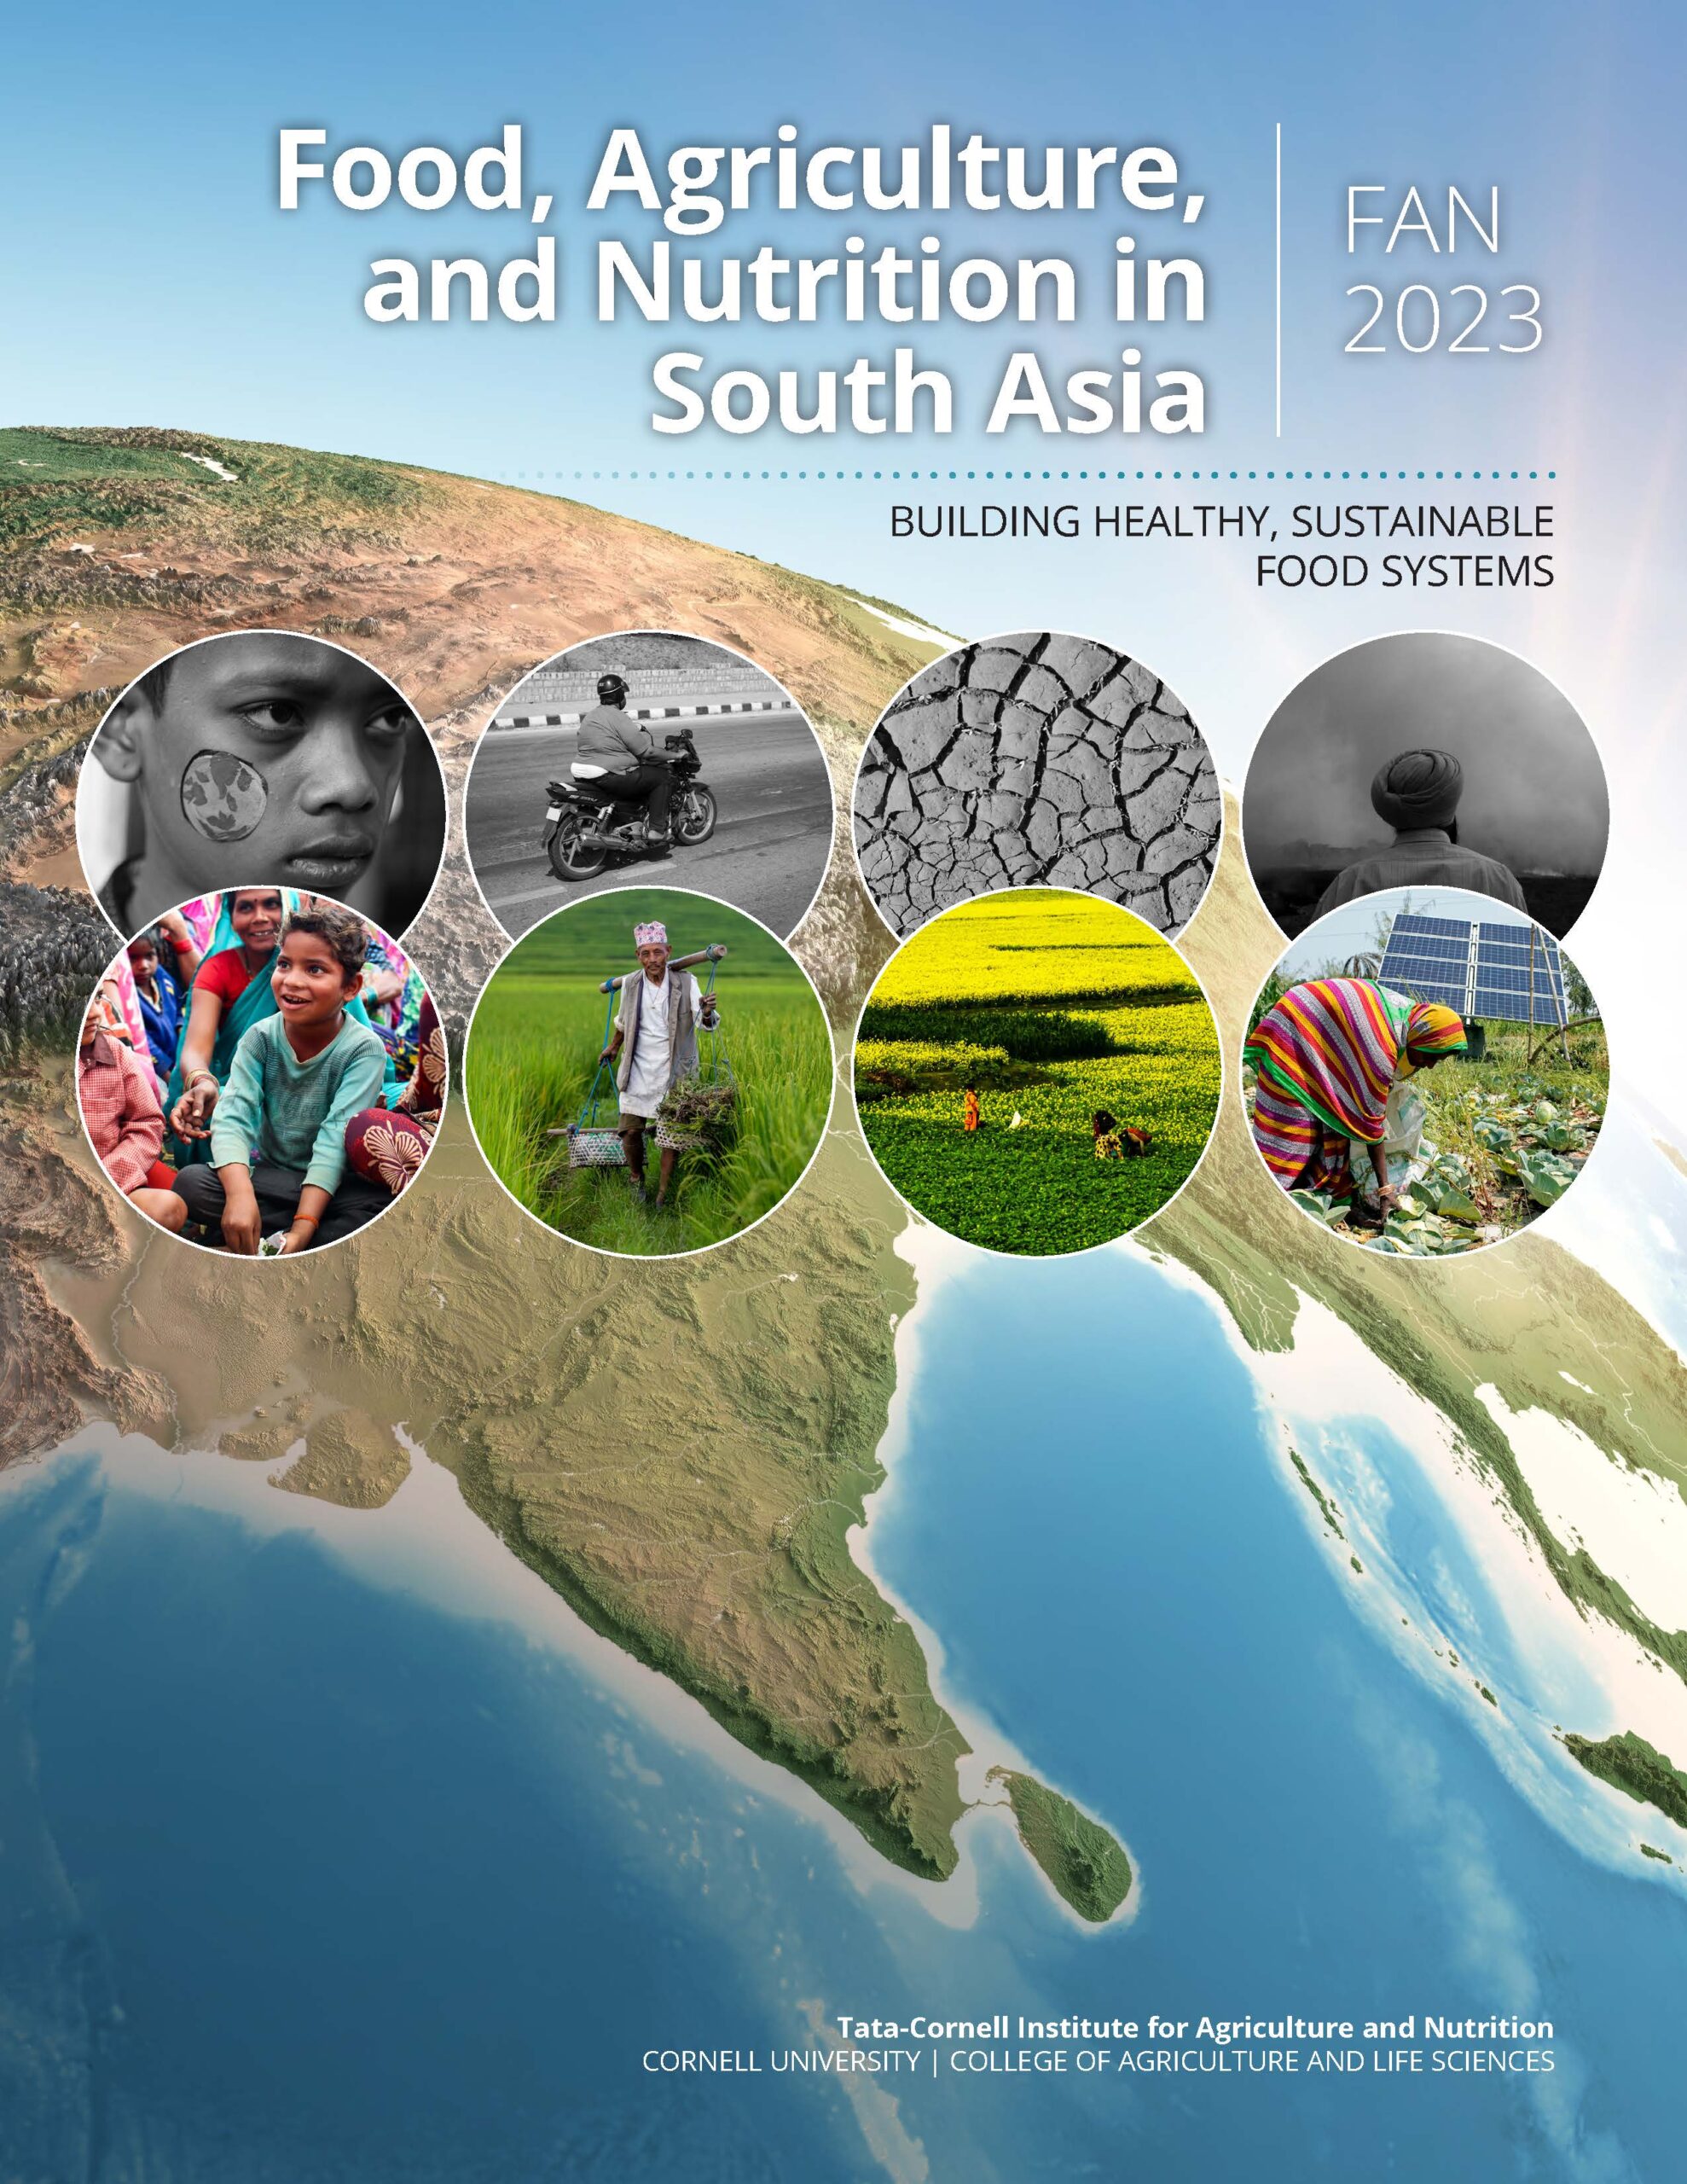 Food, Agriculture, and Nutrition in South Asia